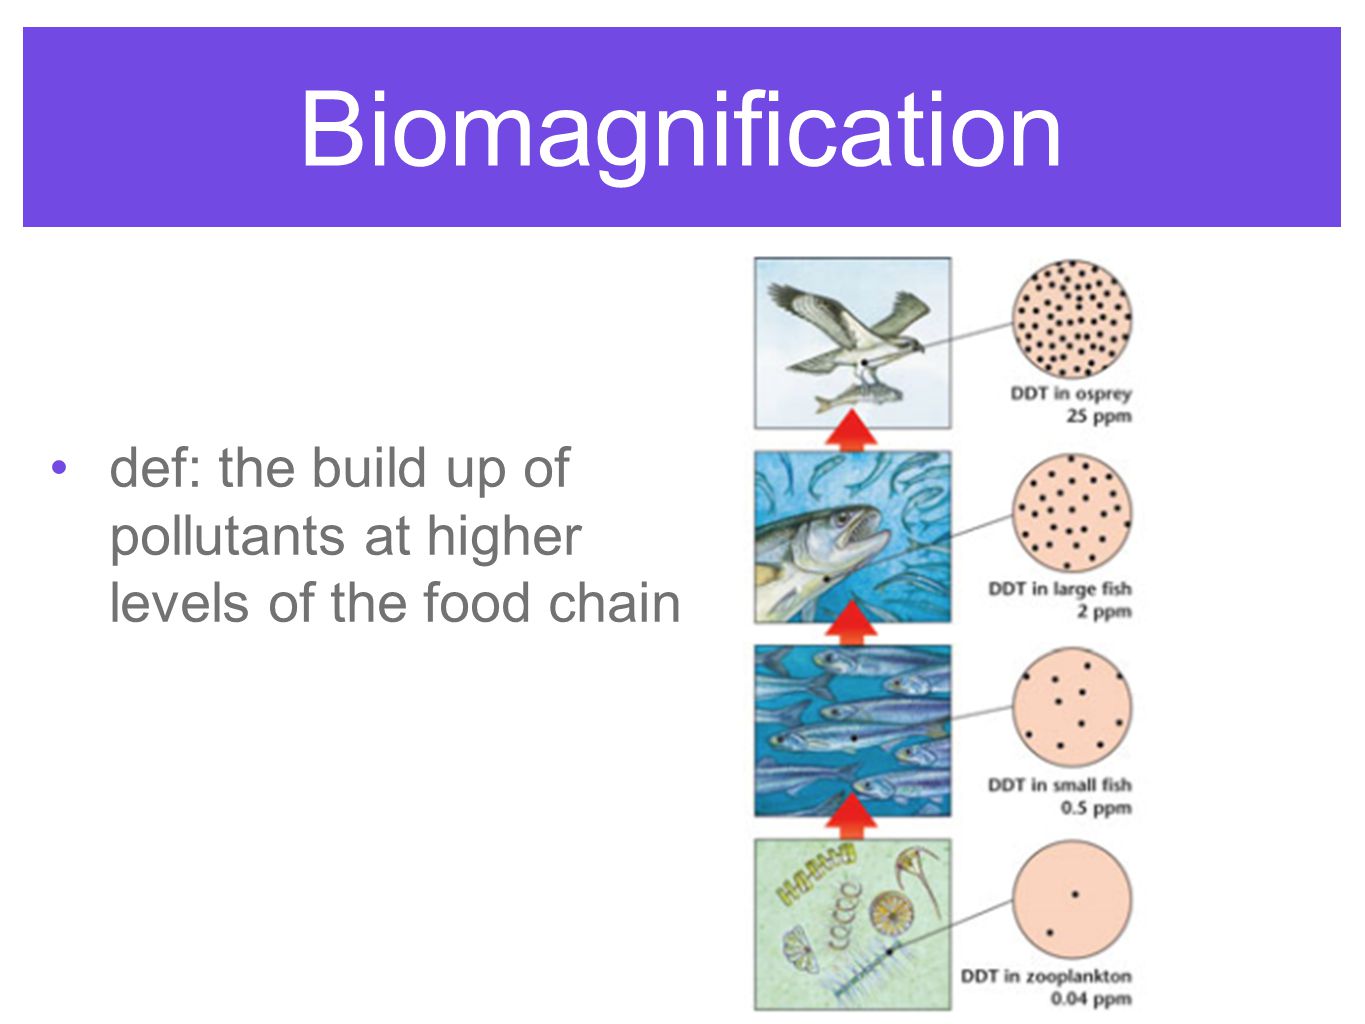 Biomagnification def: the build up of pollutants at higher levels of the food chain